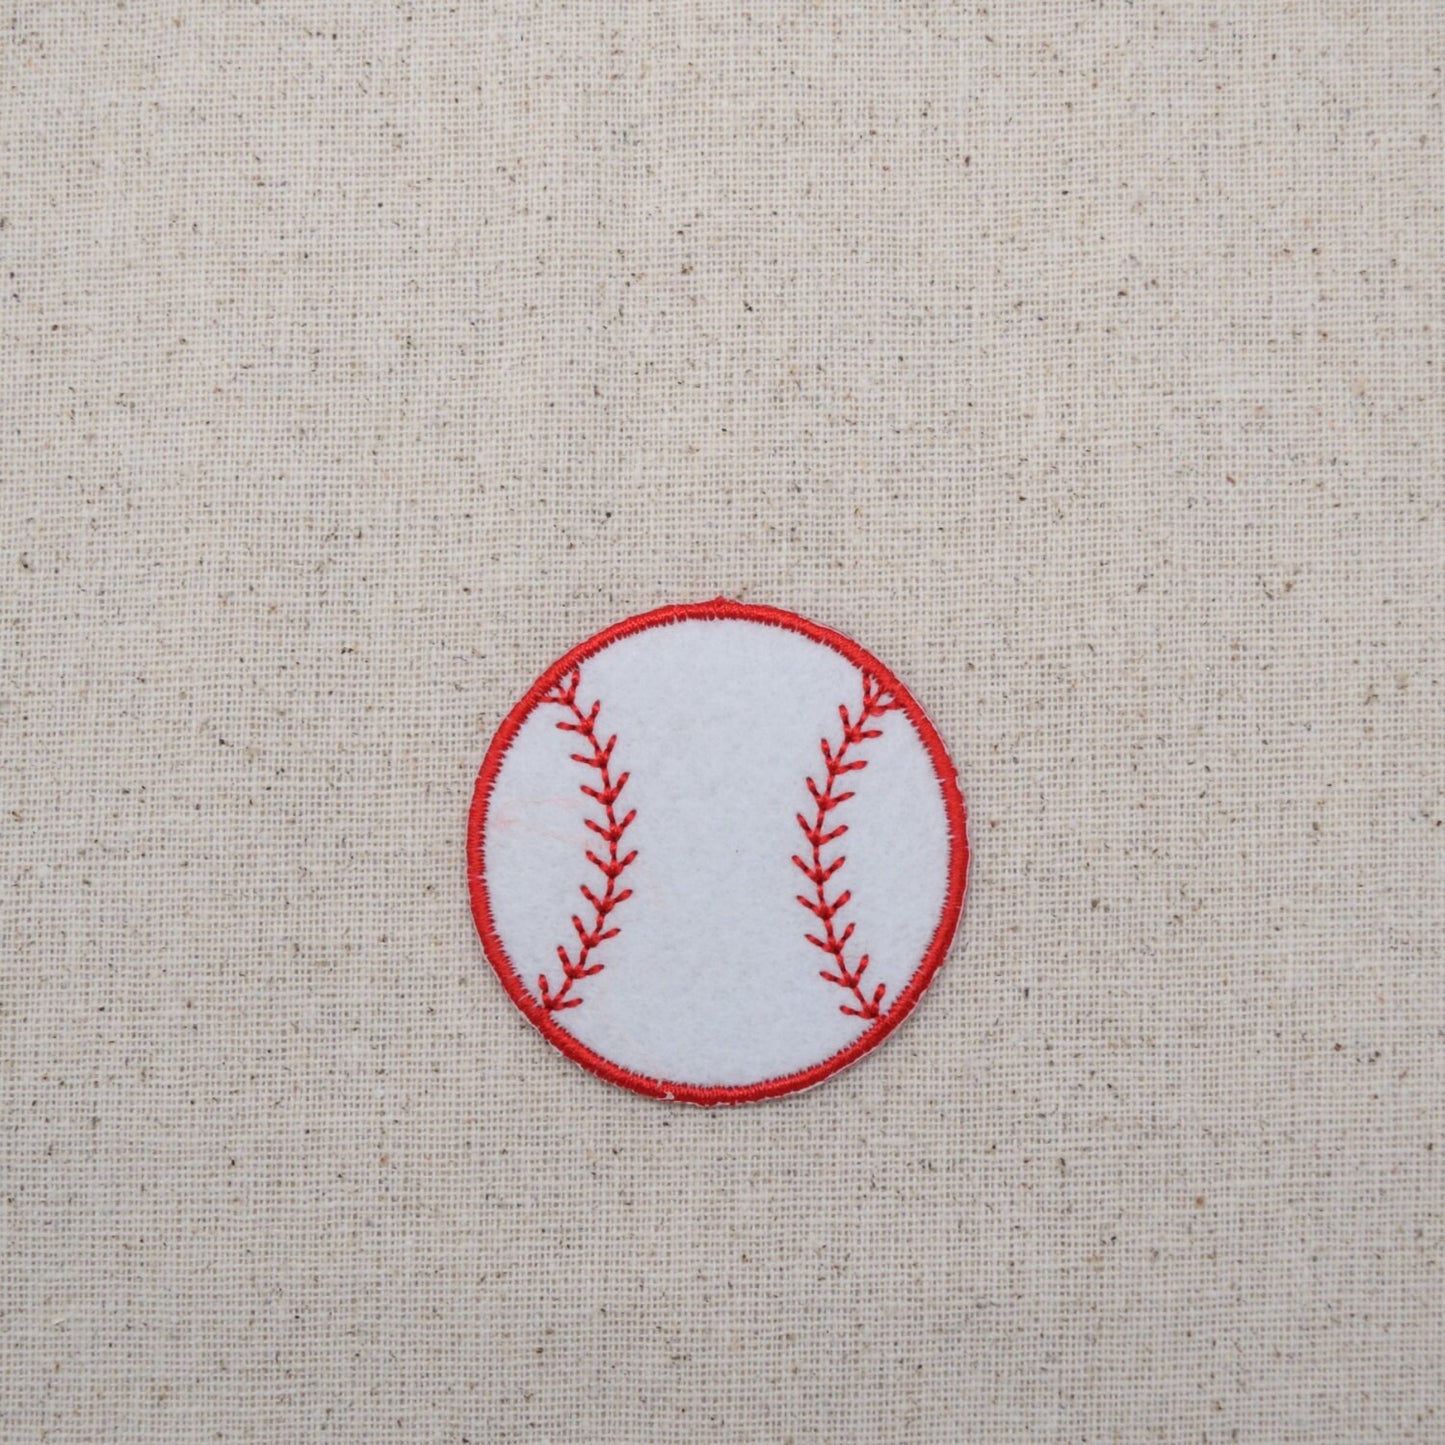 Baseball - Felt - Sports Ball - Embroidered Patch - Iron on Applique - 694573B